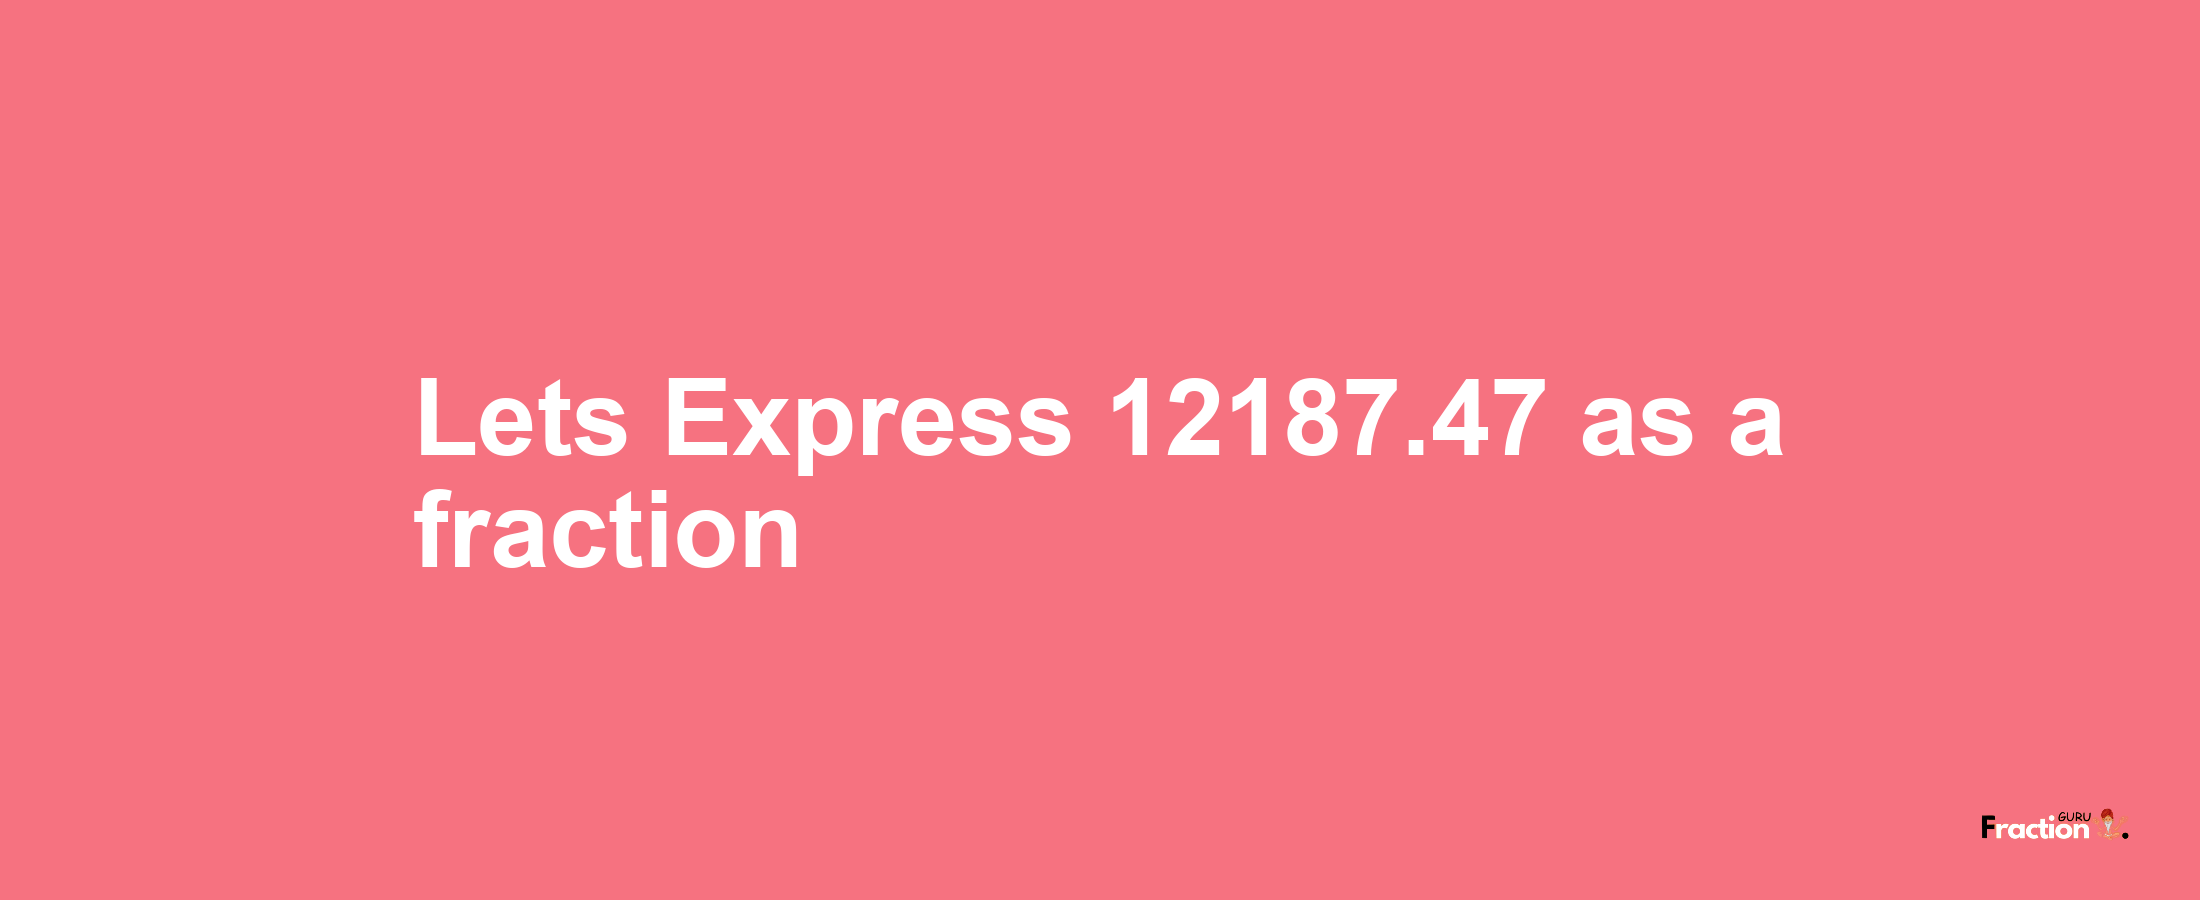 Lets Express 12187.47 as afraction